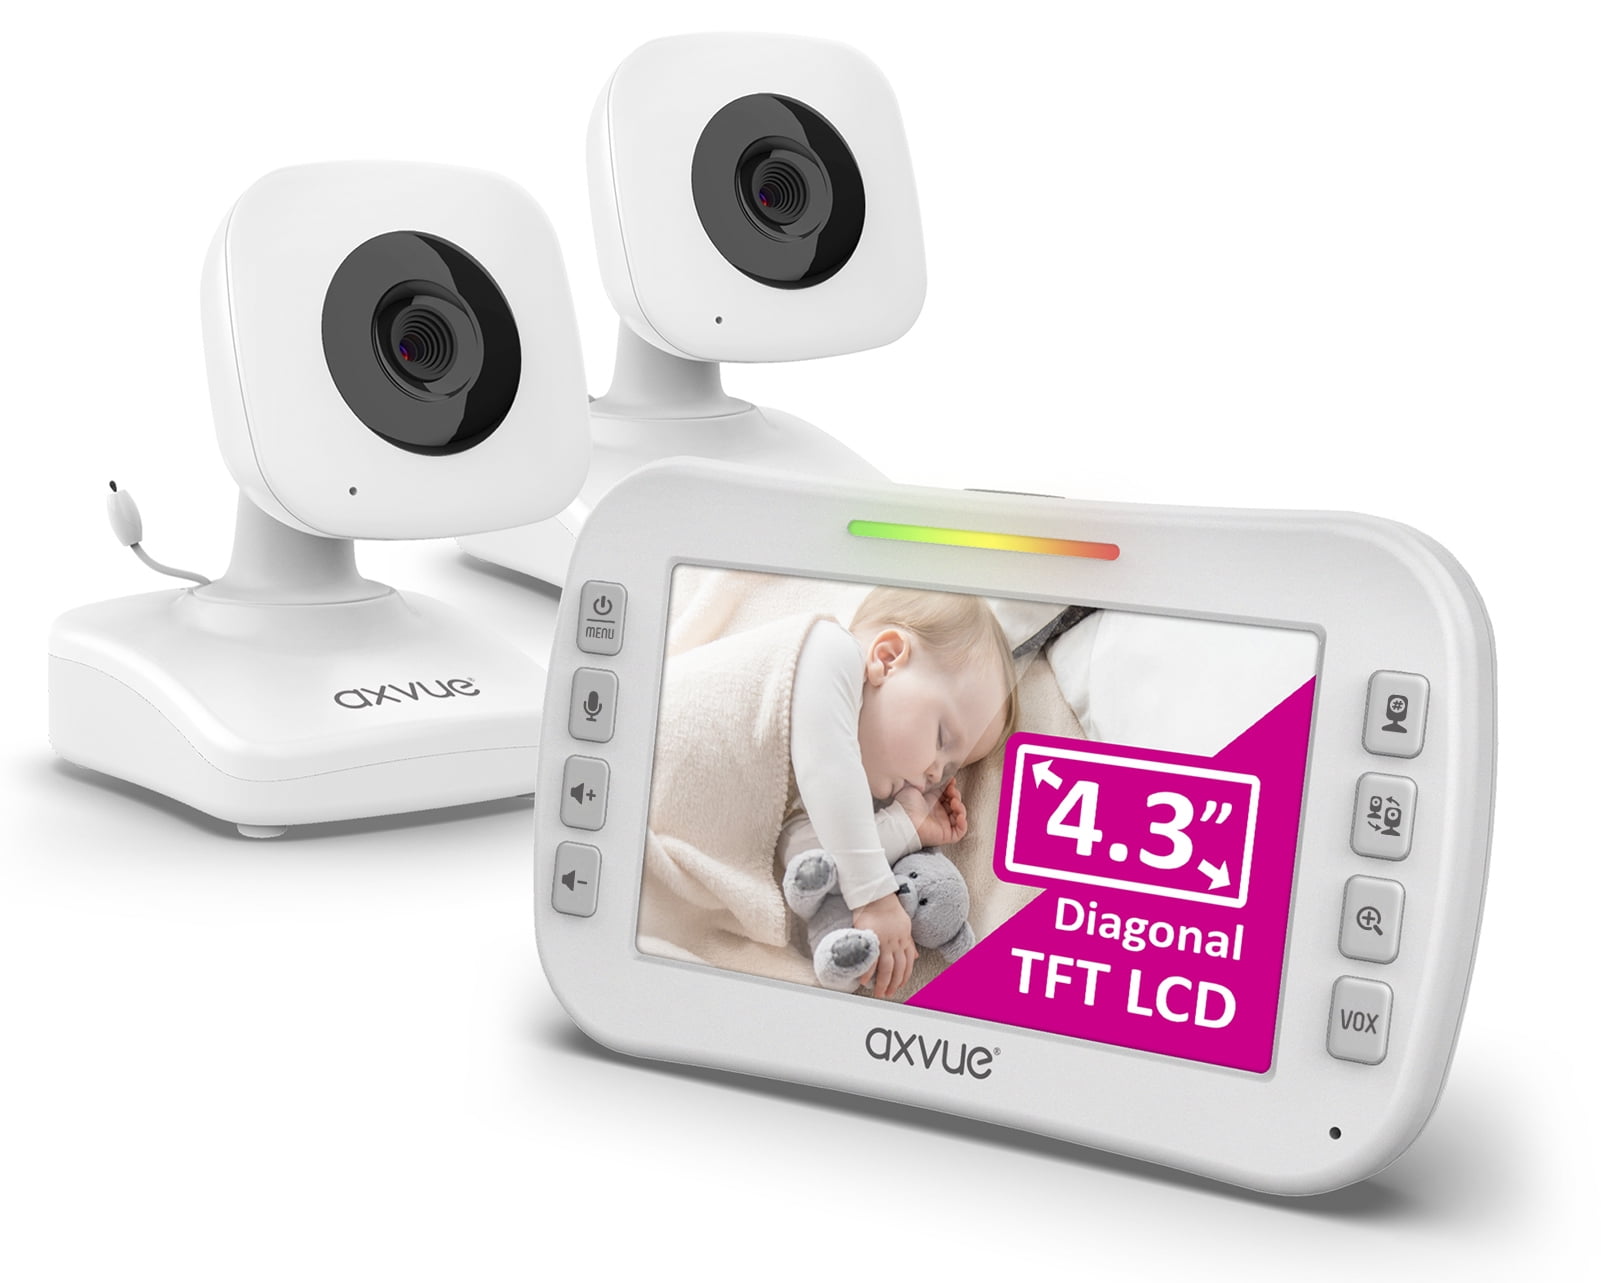 Axvue E612 Video Baby Monitor NEW UNIT 4.3" LCD Screen and 2 Camera